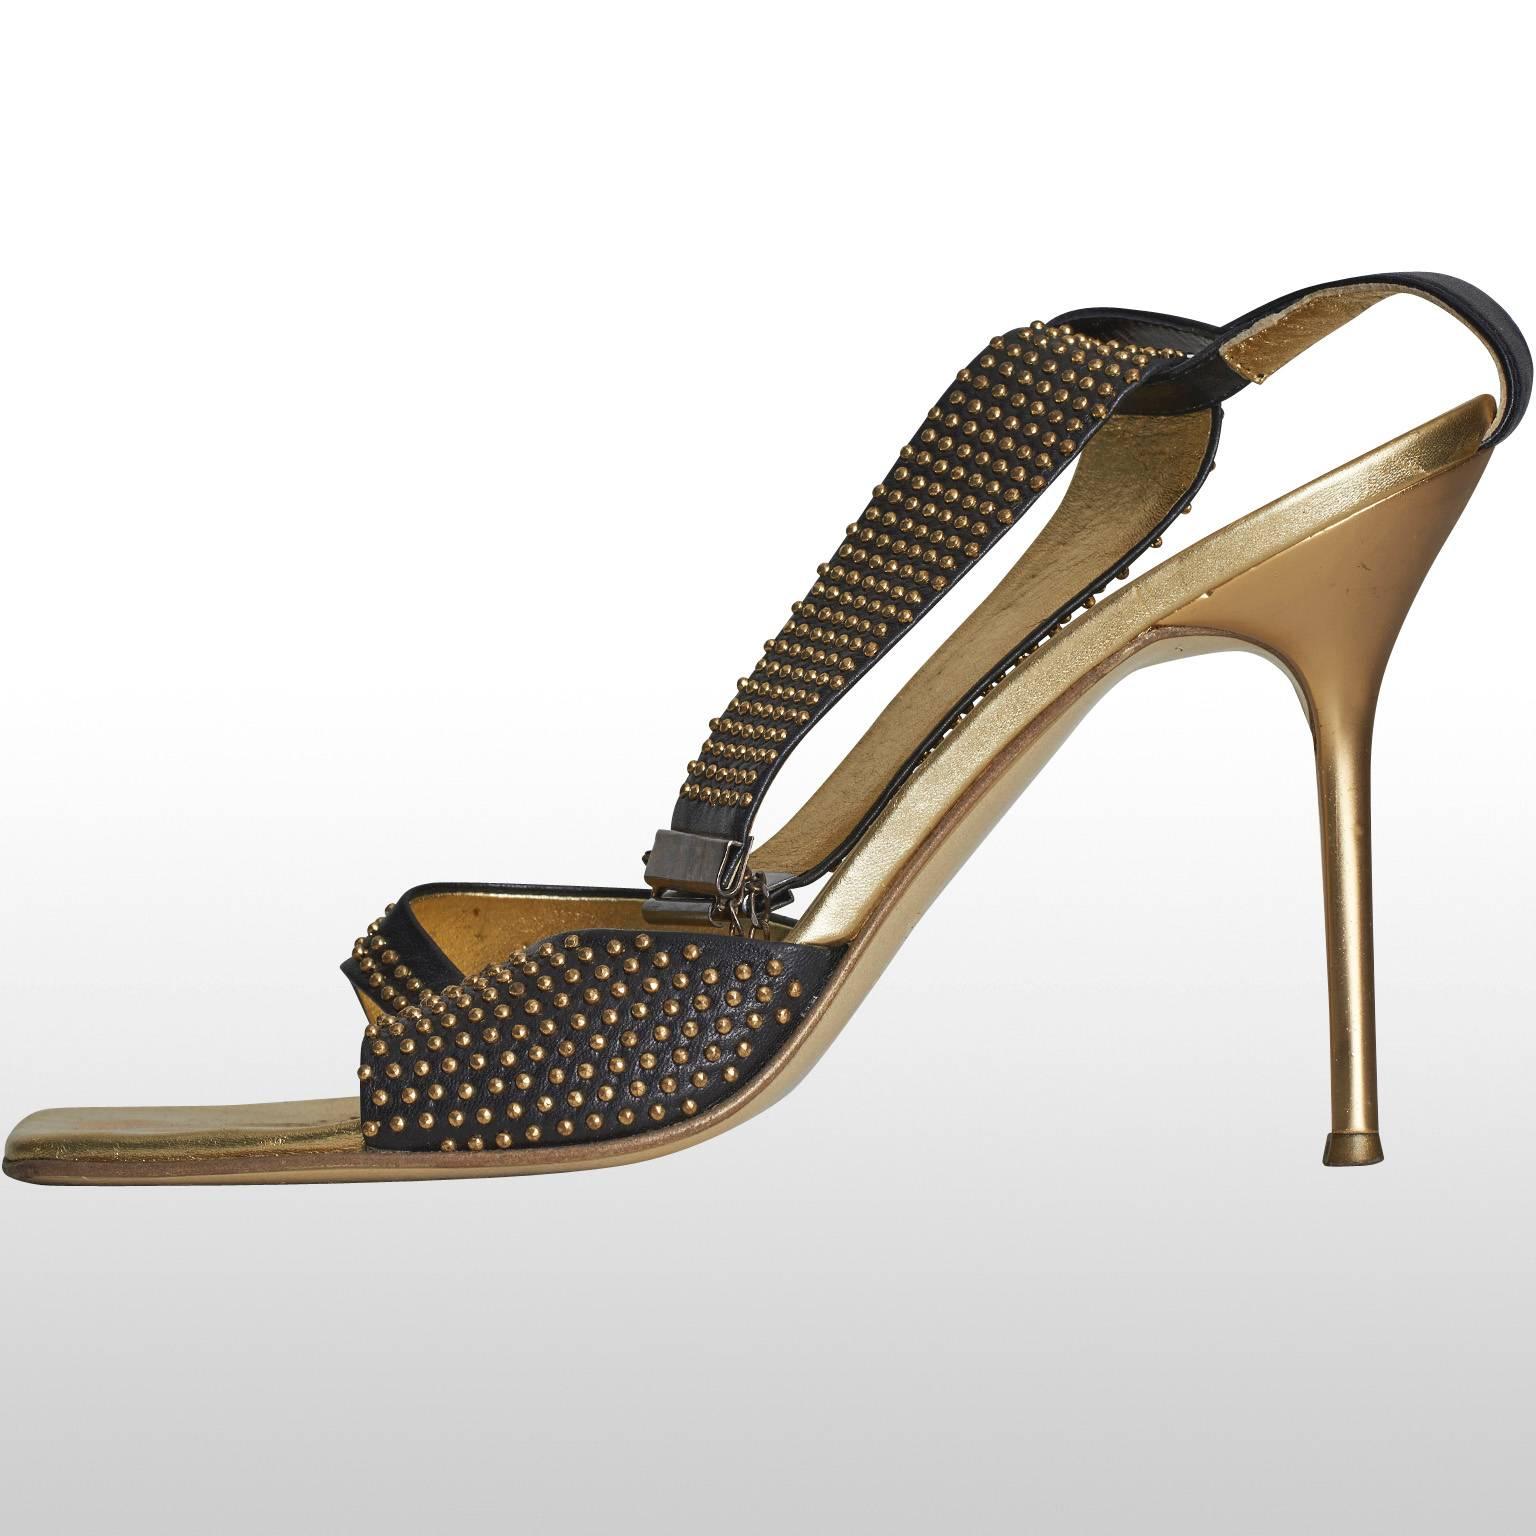 Stunning Roberto Cavalli black sandals with stiletto gold heel and gold studs. The shoes have a unique chain fastening which hooks at the front of the ankle, thus it is a desirable and original design. Ideal for party or evening attire, adding a